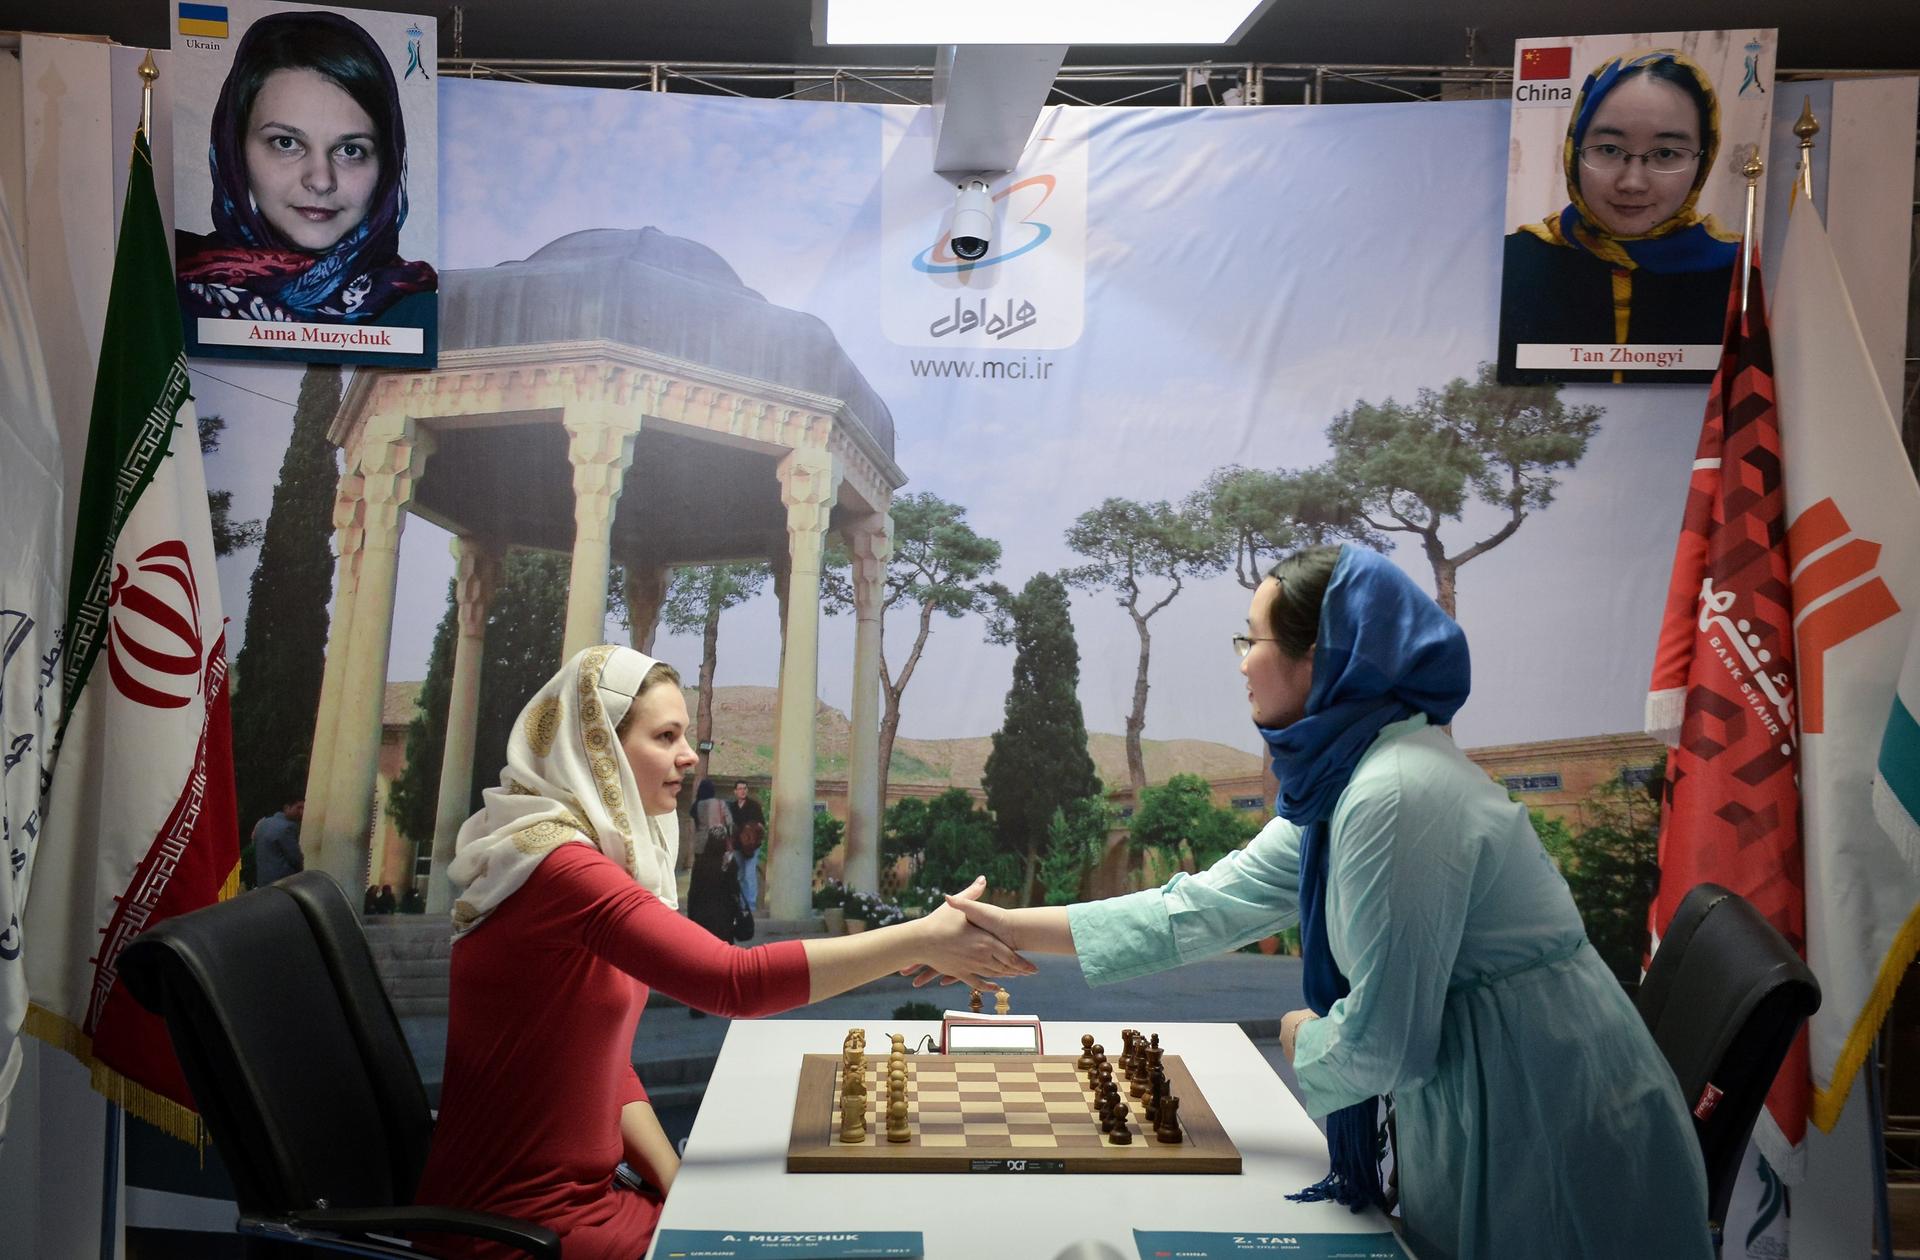 Anna Muzychuk shakes hands with Tan Zhongyi at the Women's World Chess Championship in Tehran, Iran on March 03, 2017.